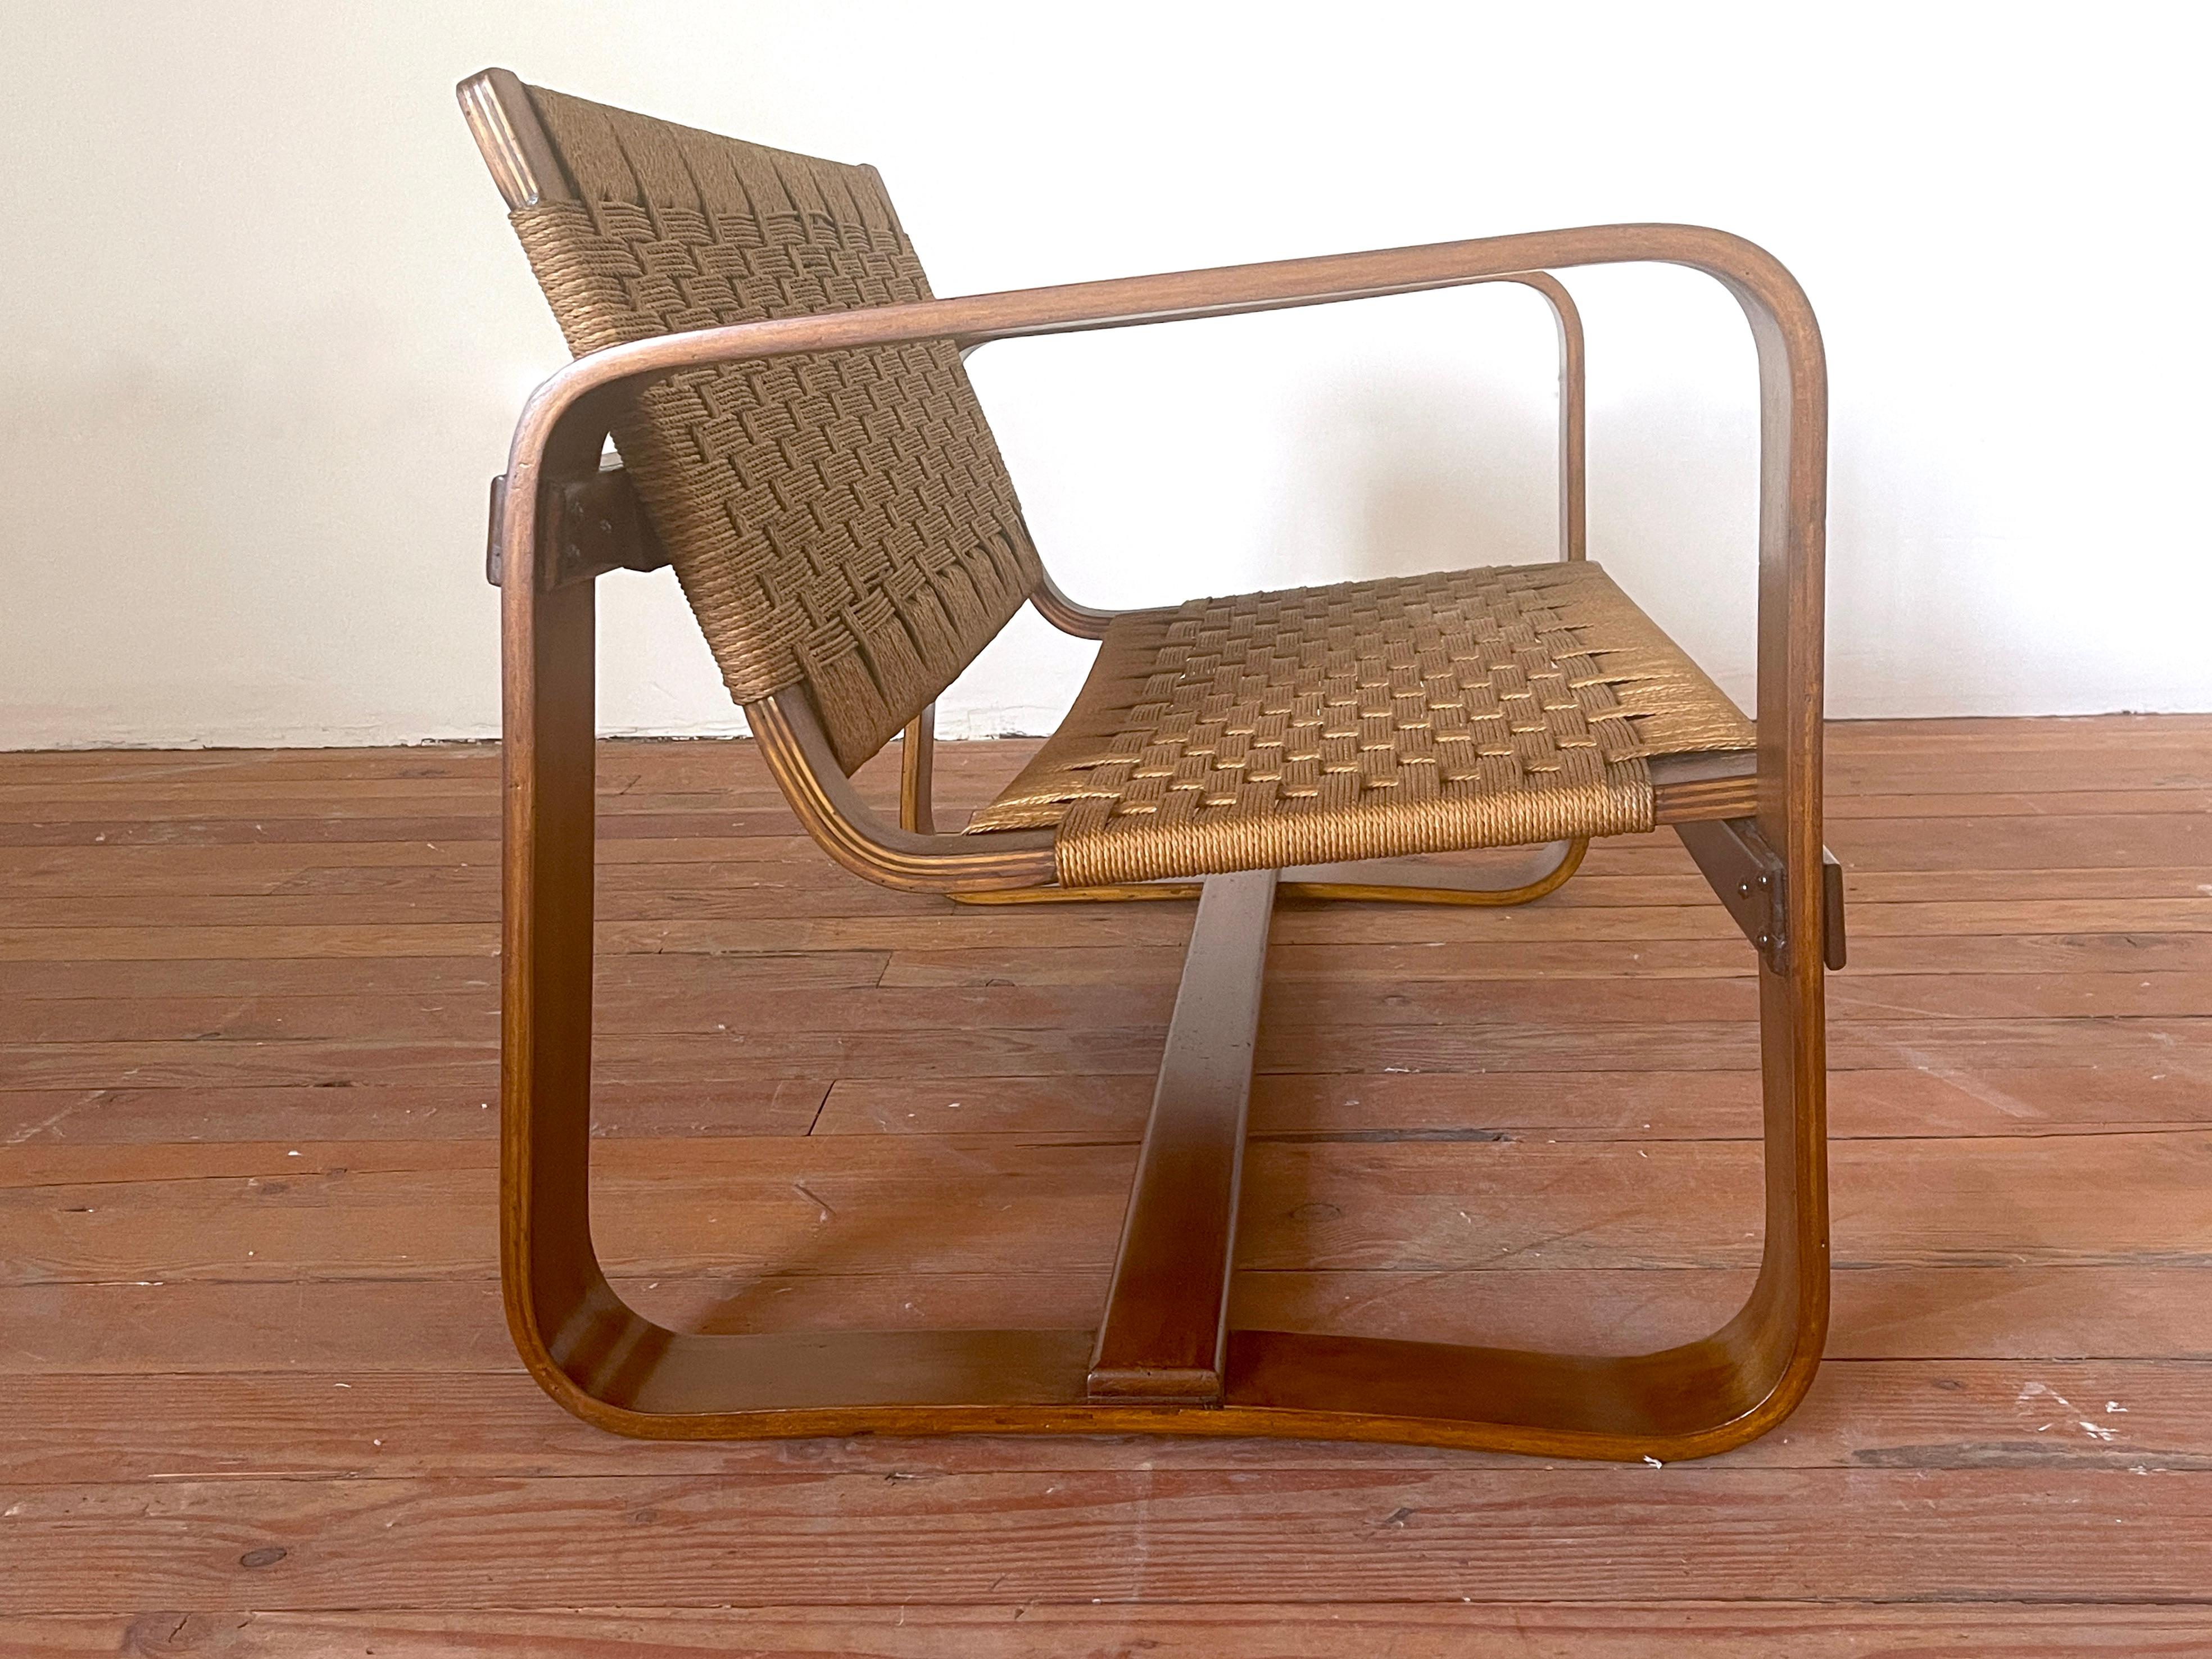 Guiseppe Pagano Pogatschnig Bench, 1939 For Sale 6